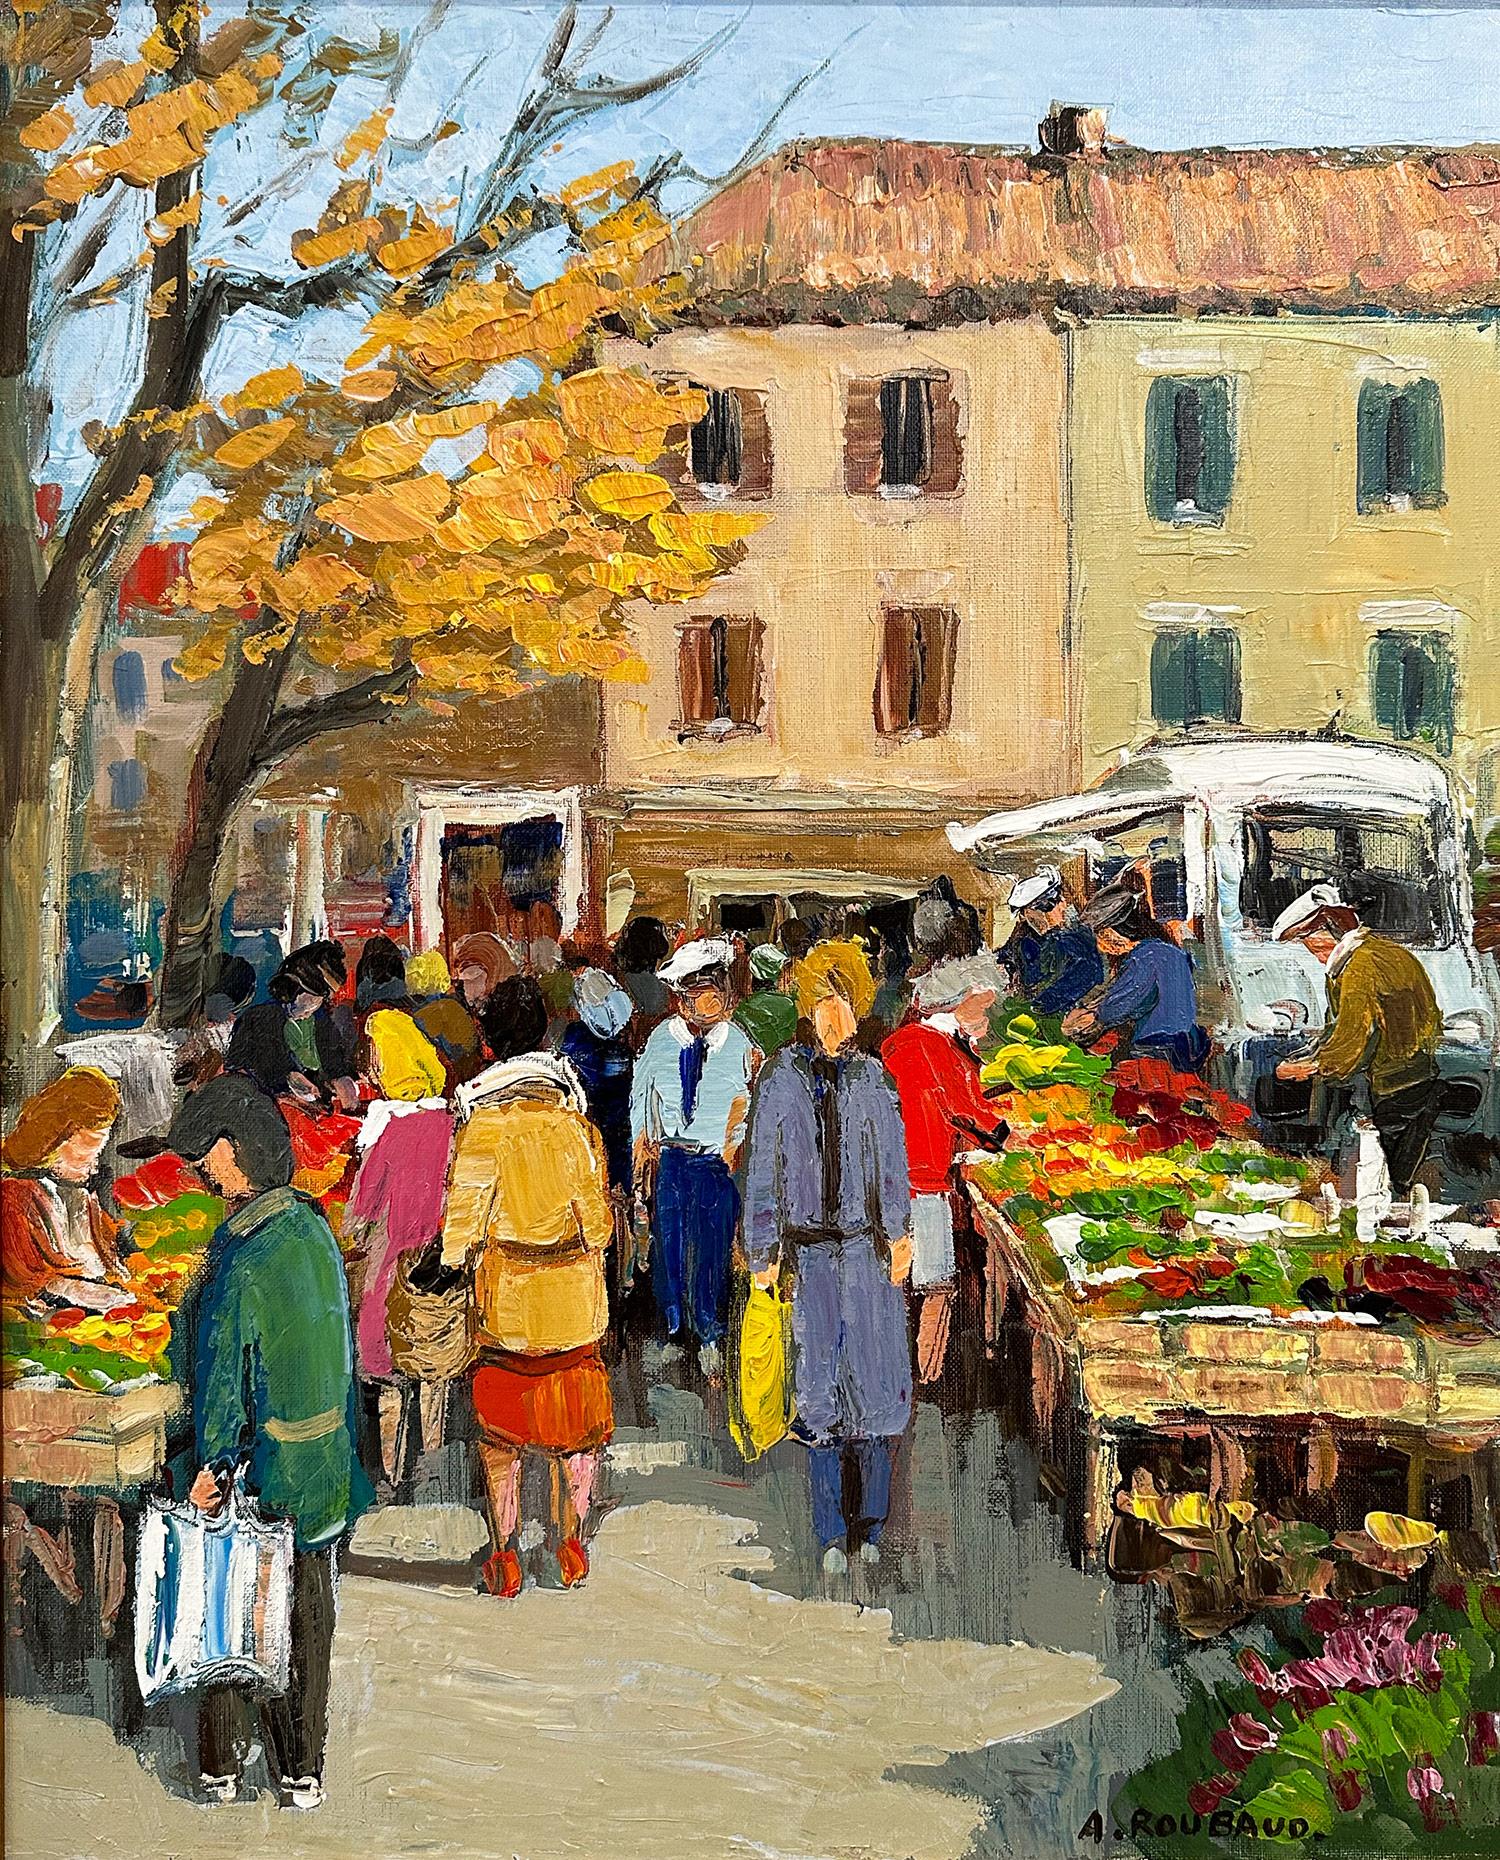 A strong Post-Impressionist oil on canvas painting by André Roubaud depicting the Market in Martigues in France, executed in wonderful colors and gestural brush strokes. With magnificent details, this painting is a wonderful example of Roubaud’s